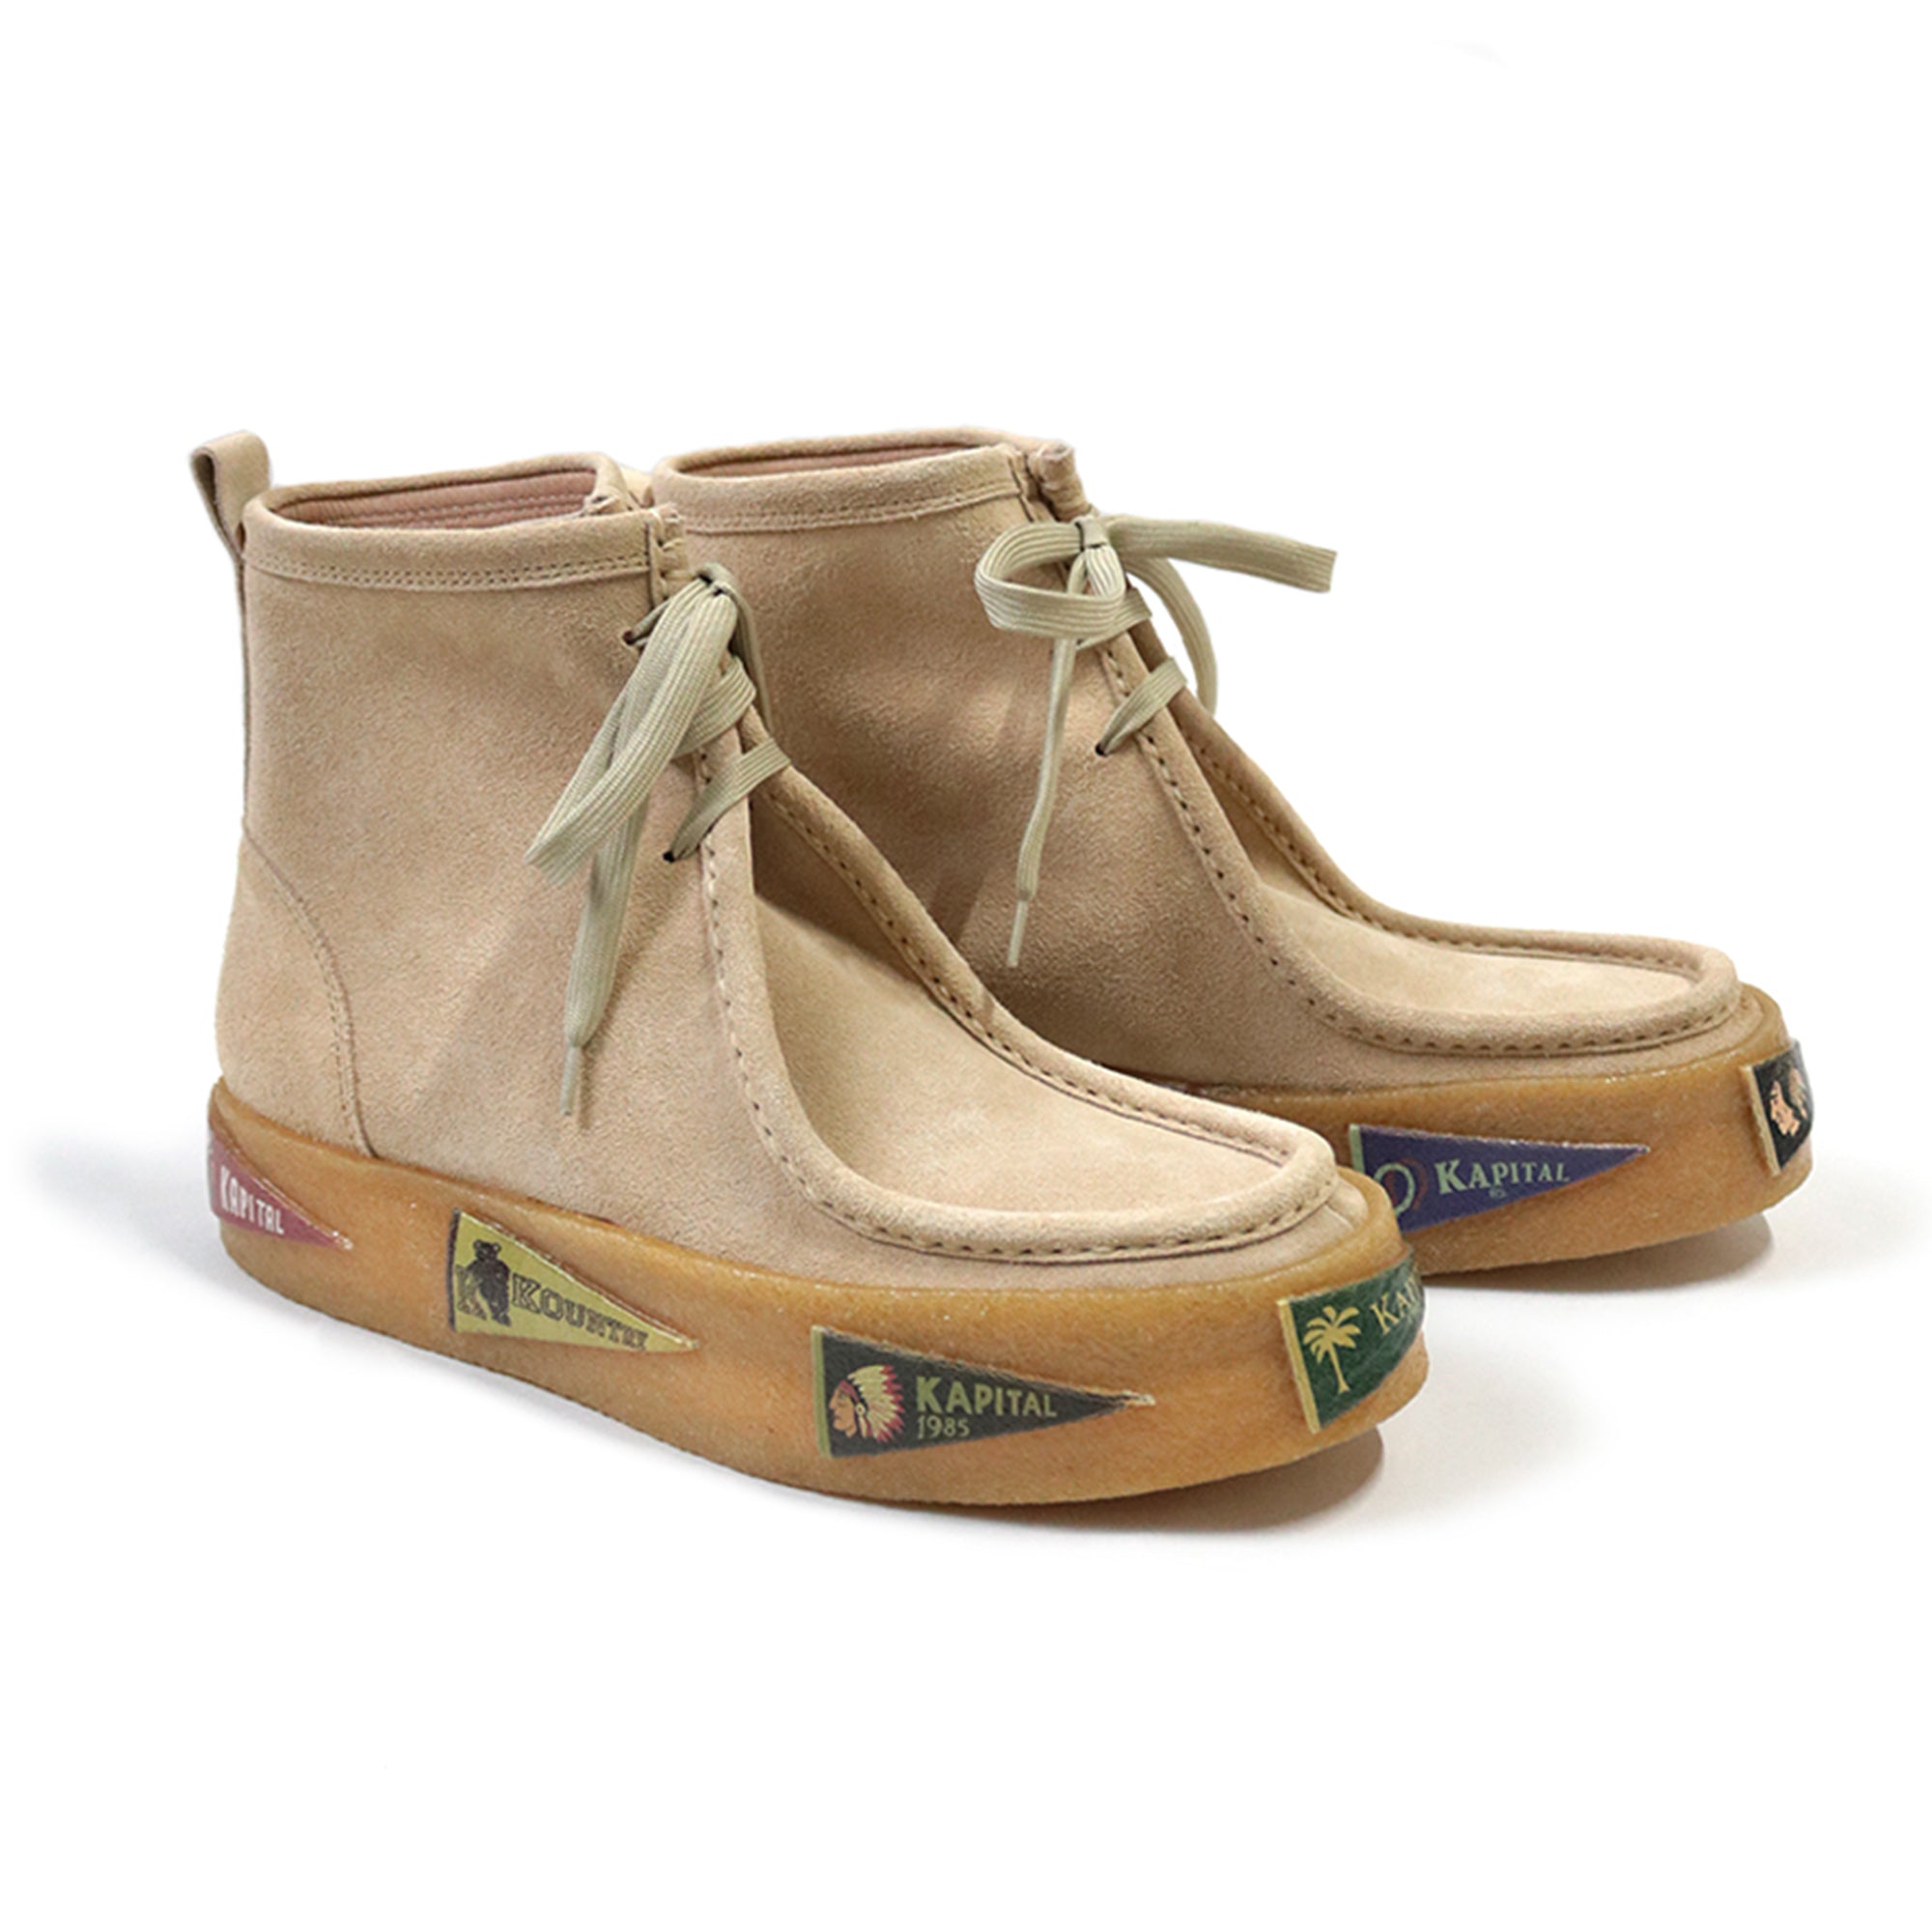 KAPITAL - LEATHER PENNANTS WALLABEE BOOTS - BEIGE at Mannahatta NYC